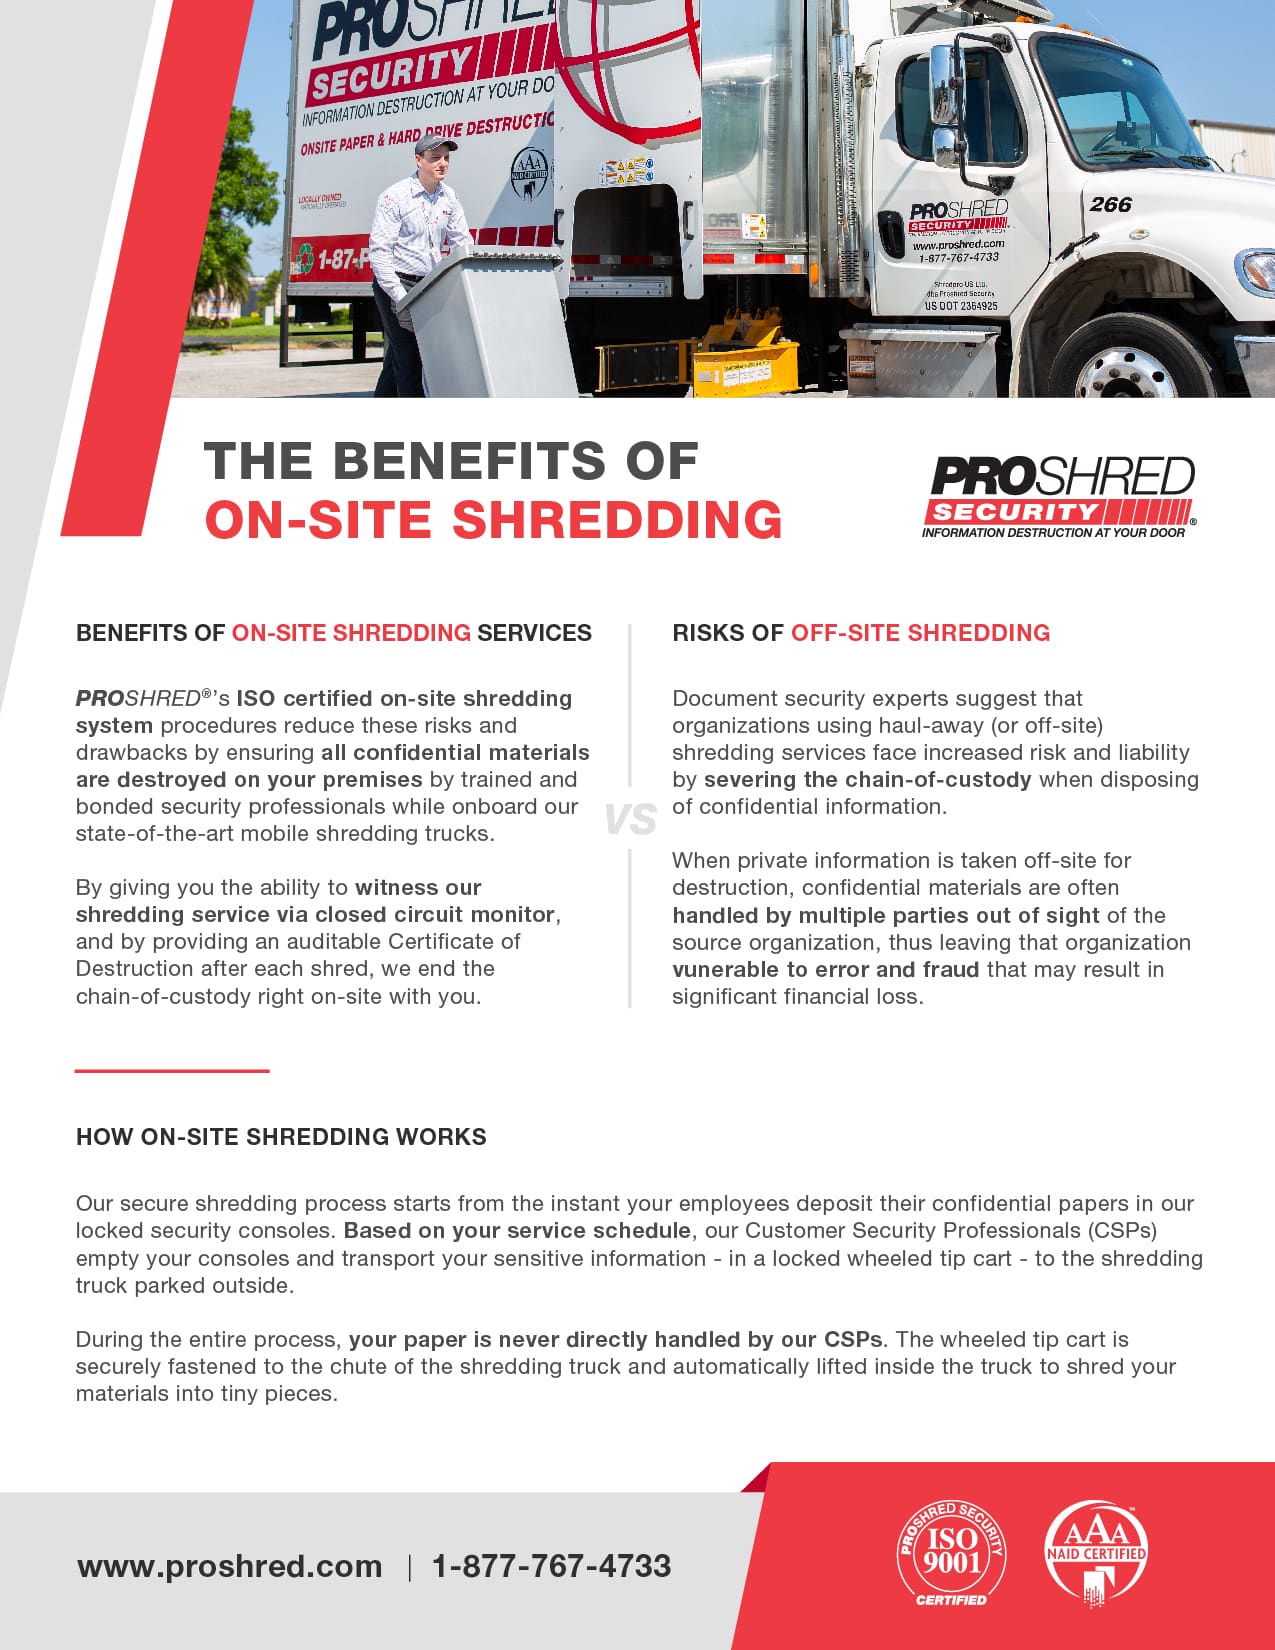 The Benefits of On-Site Shredding